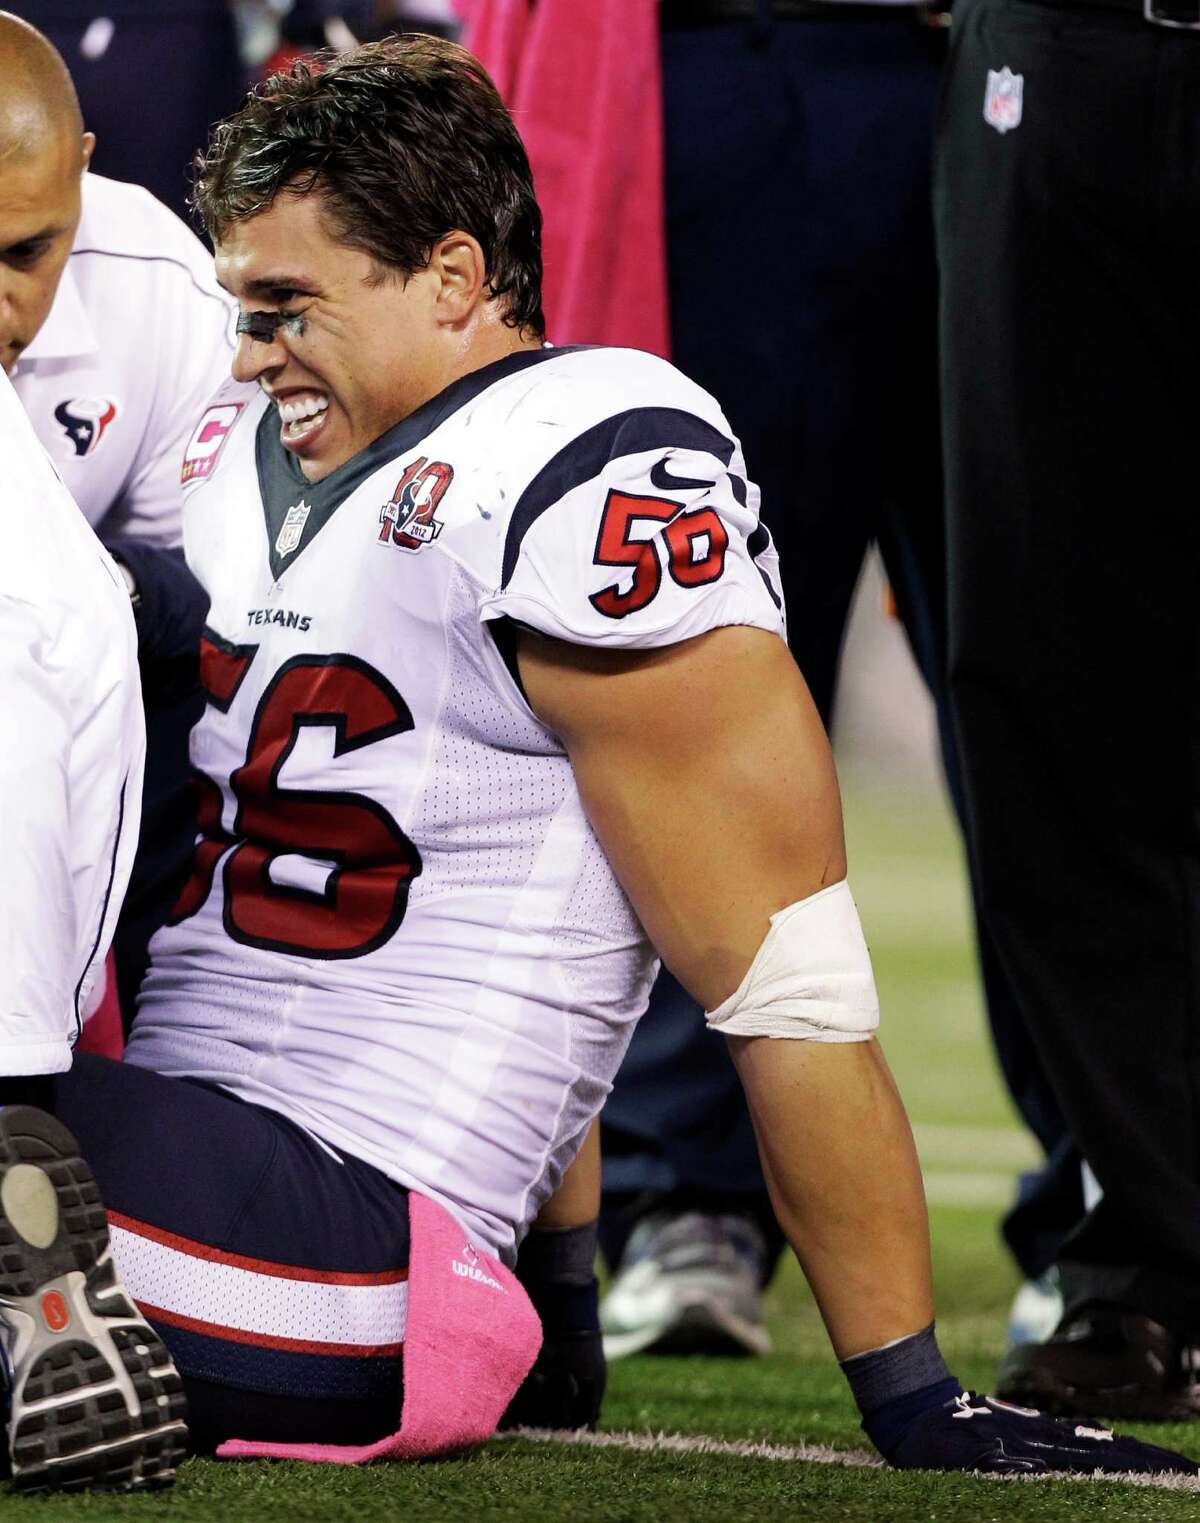 Trainers work on Houston Texans inside linebacker Brian Cushing (56) during the first half of an NFL football game against the New York Jets, Monday, Oct. 8, 2012, in East Rutherford, N.J. Cushing left the game in the second quarter with a left knee injury. (AP Photo/Kathy Willens)